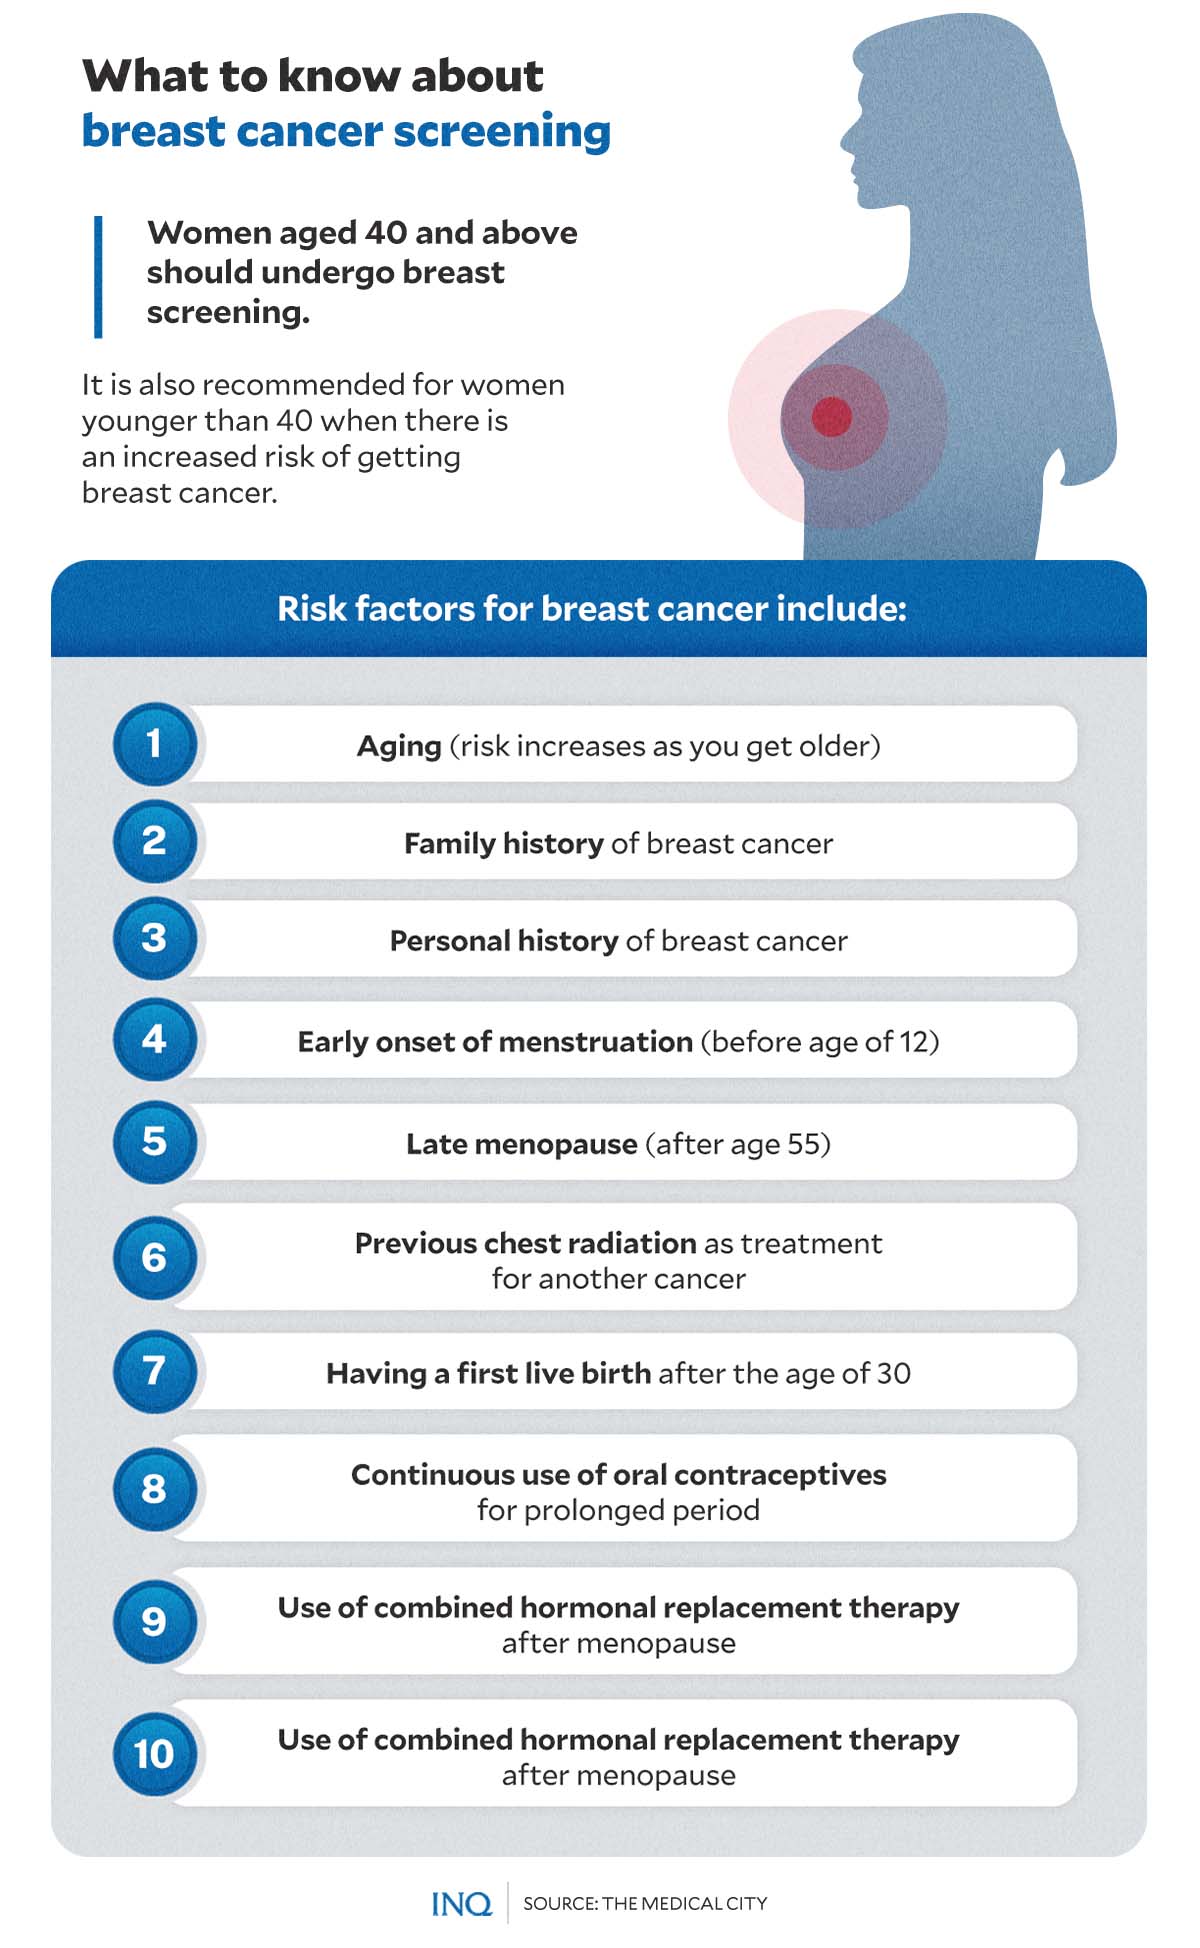 WHAT TO KNOW ABOUT BREAST CANCER SCREENING